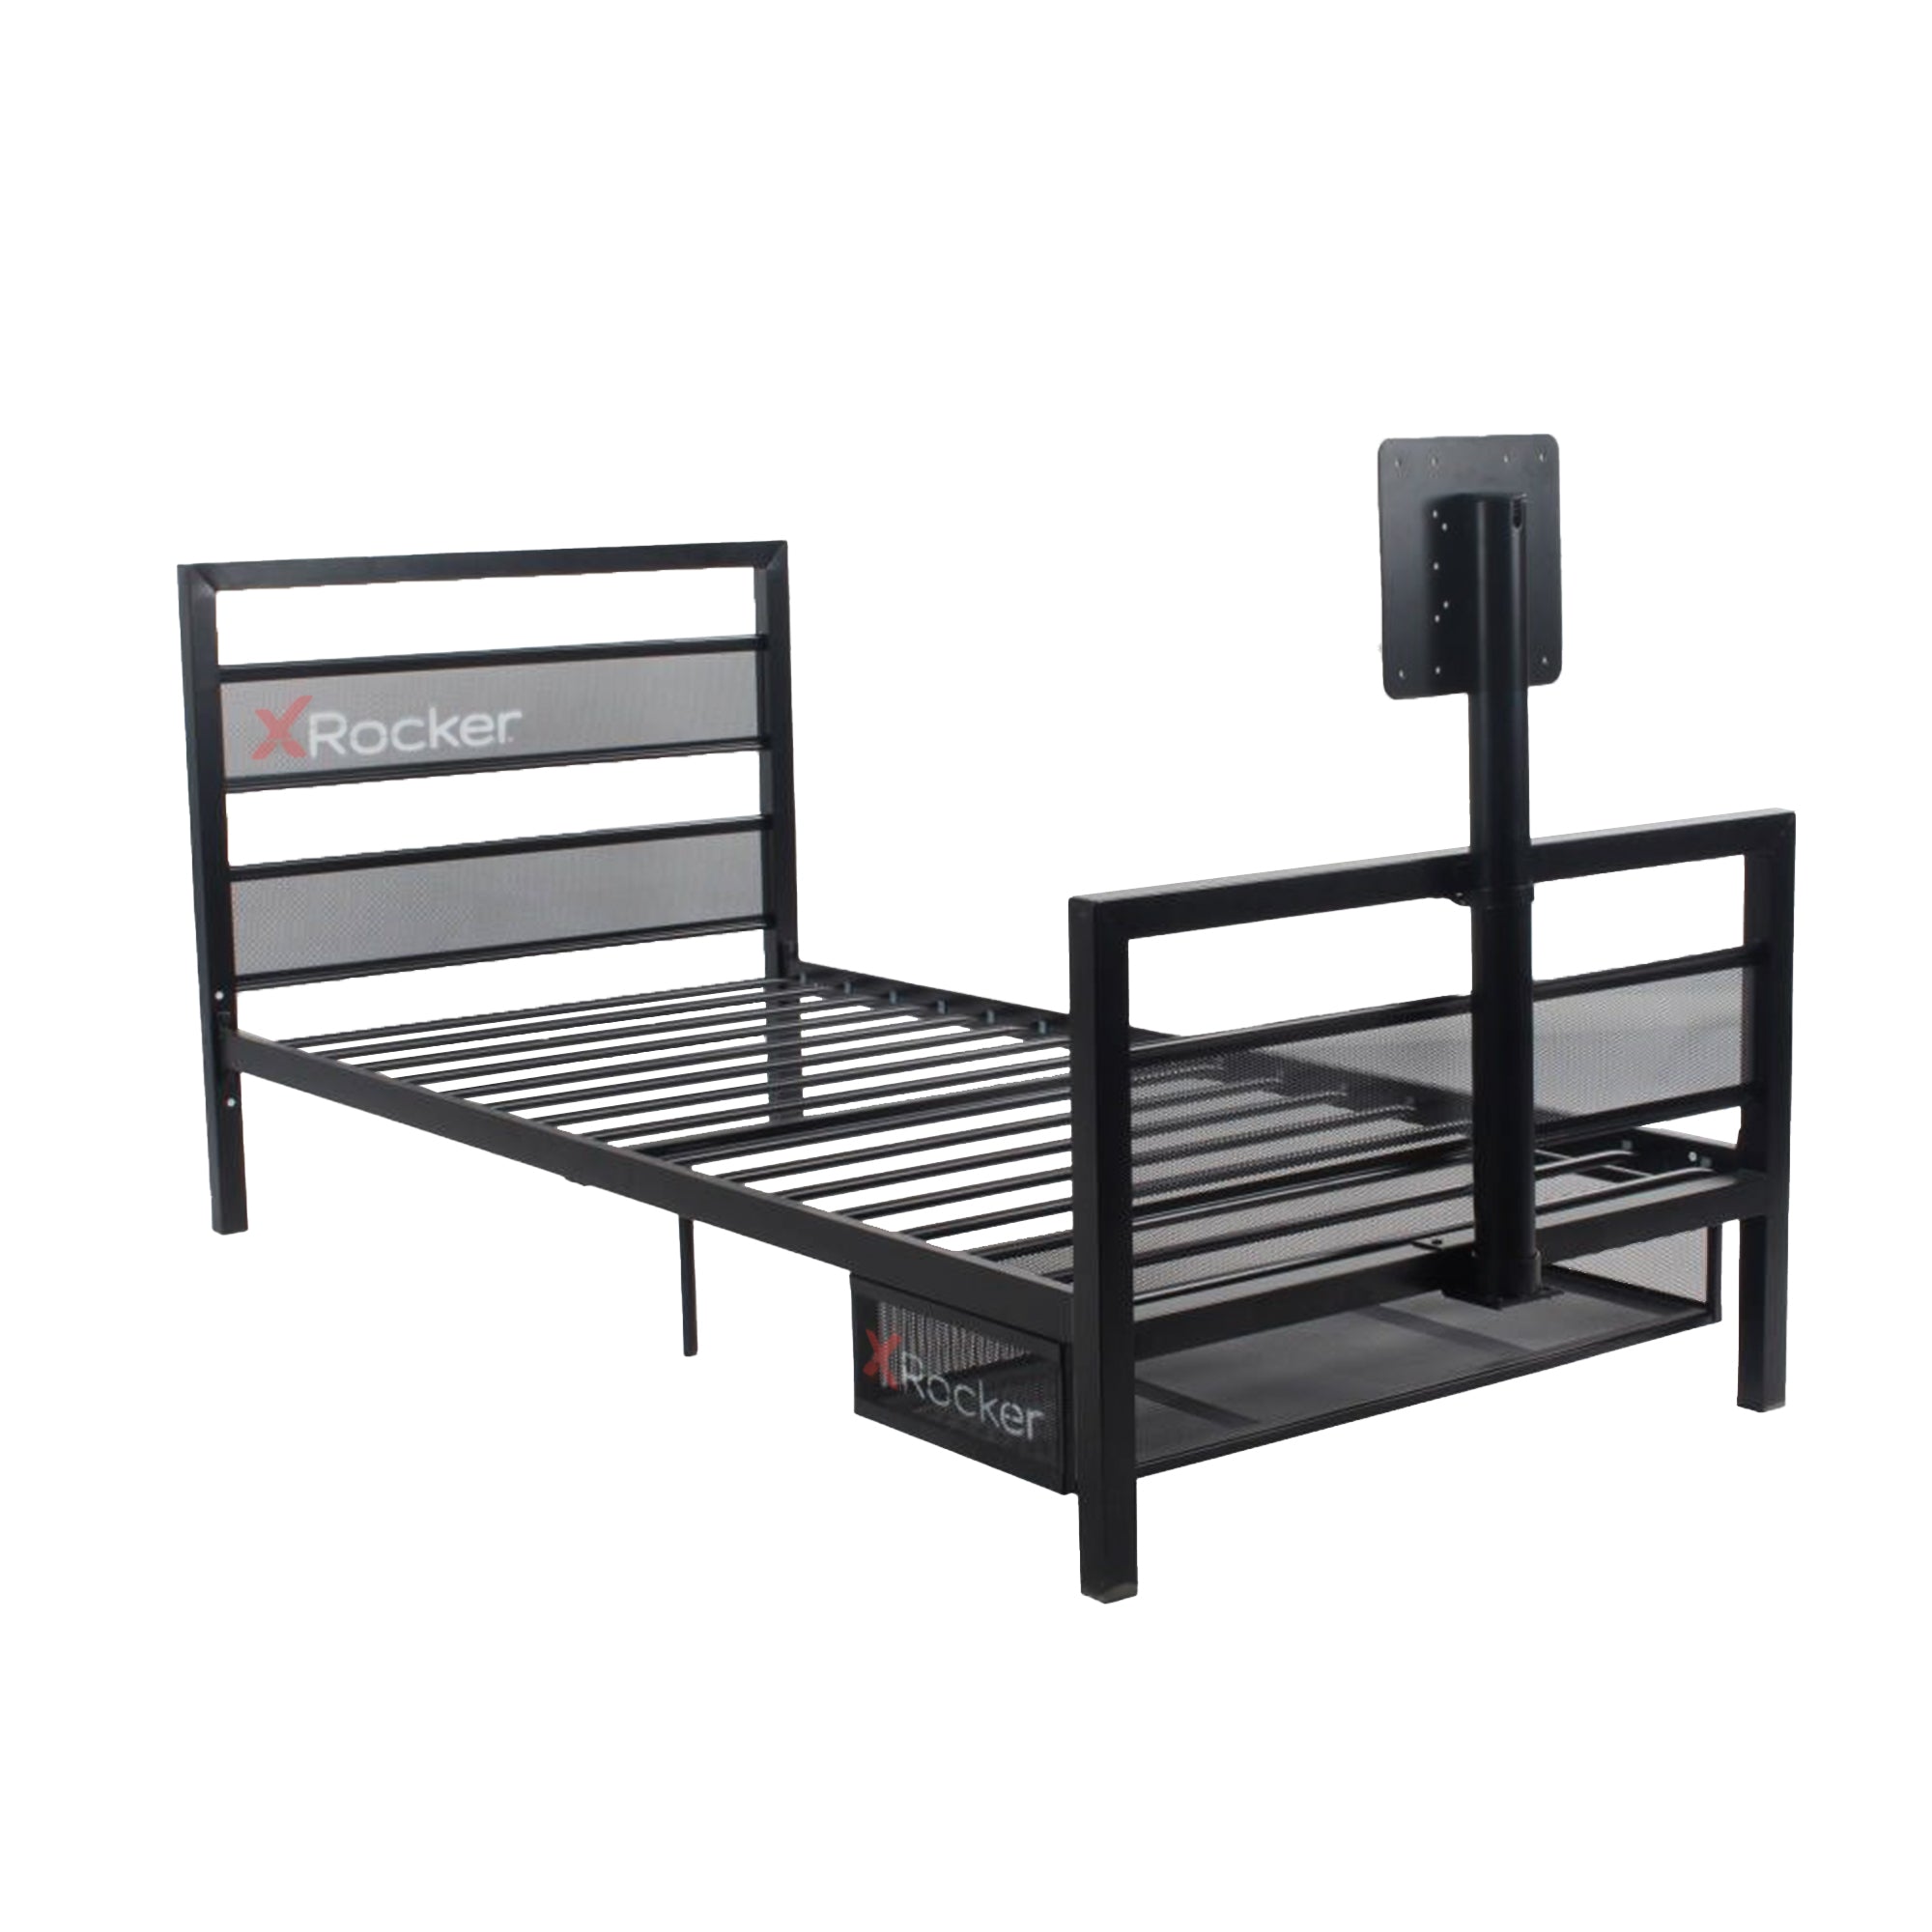 Basecamp Gaming Bed with TV Mount and Storage Drawer, Black, Twin